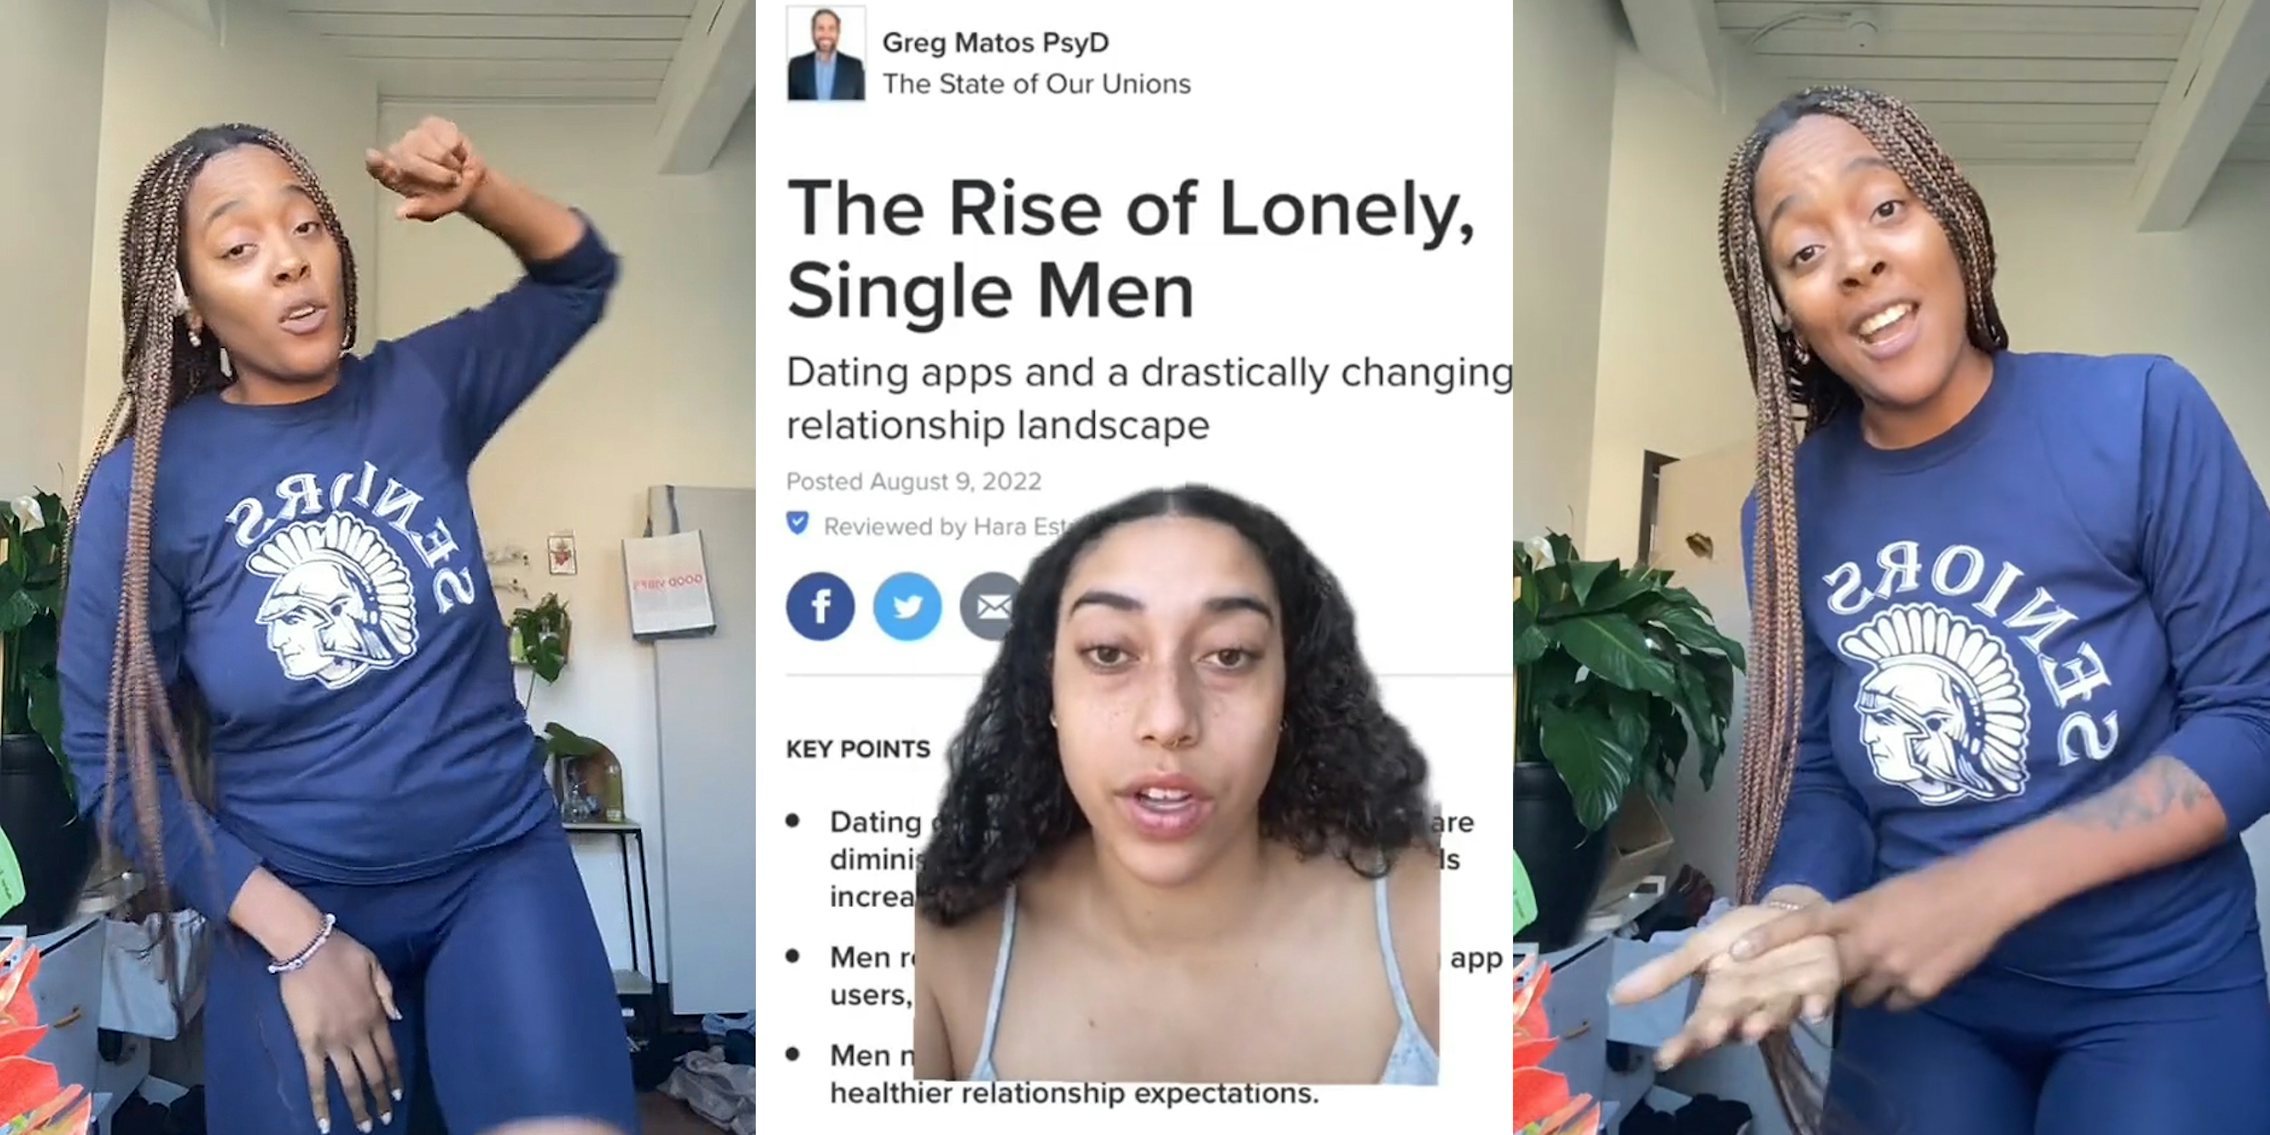 woman speaking hand up (l) woman greenscreen TikTok over article 'The Rise of Lonley, Single Men' caption 'Dating apps and a drastically changing relationship landscape' (c) woman speaking hand pointing on other hand (r)